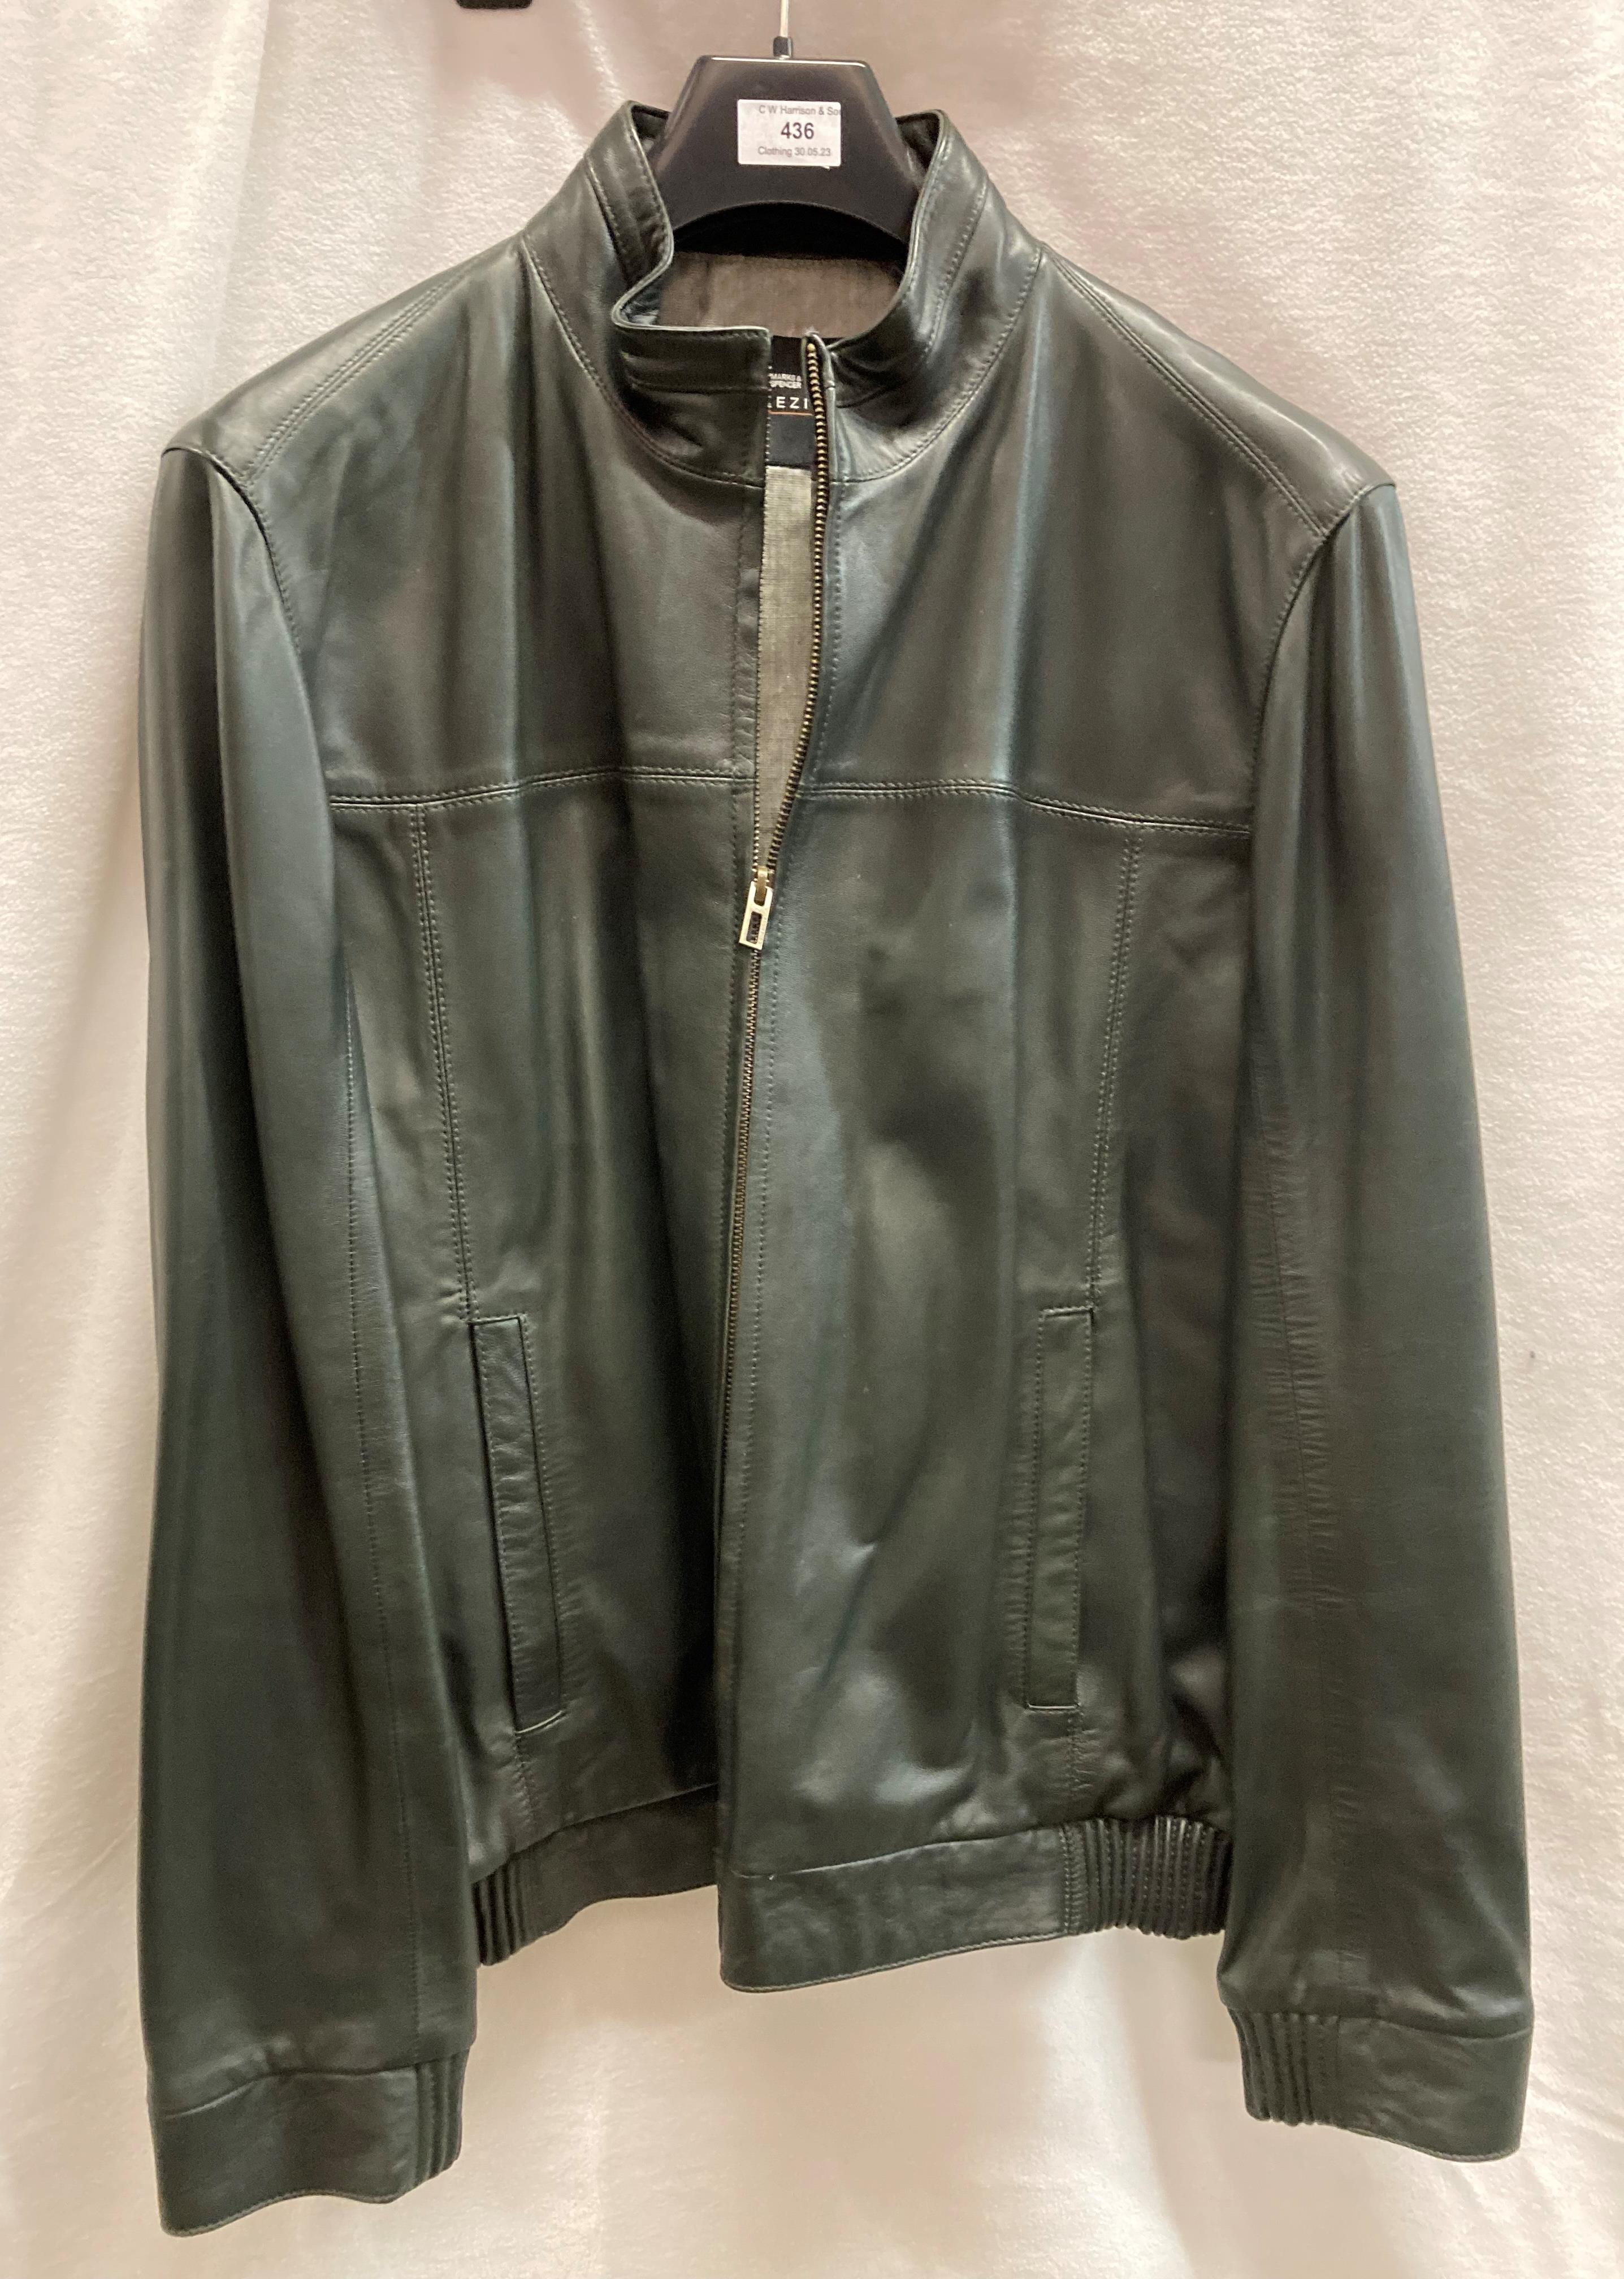 A Marks & Spencer Collezione gentleman's back leather jacket, no size shown,